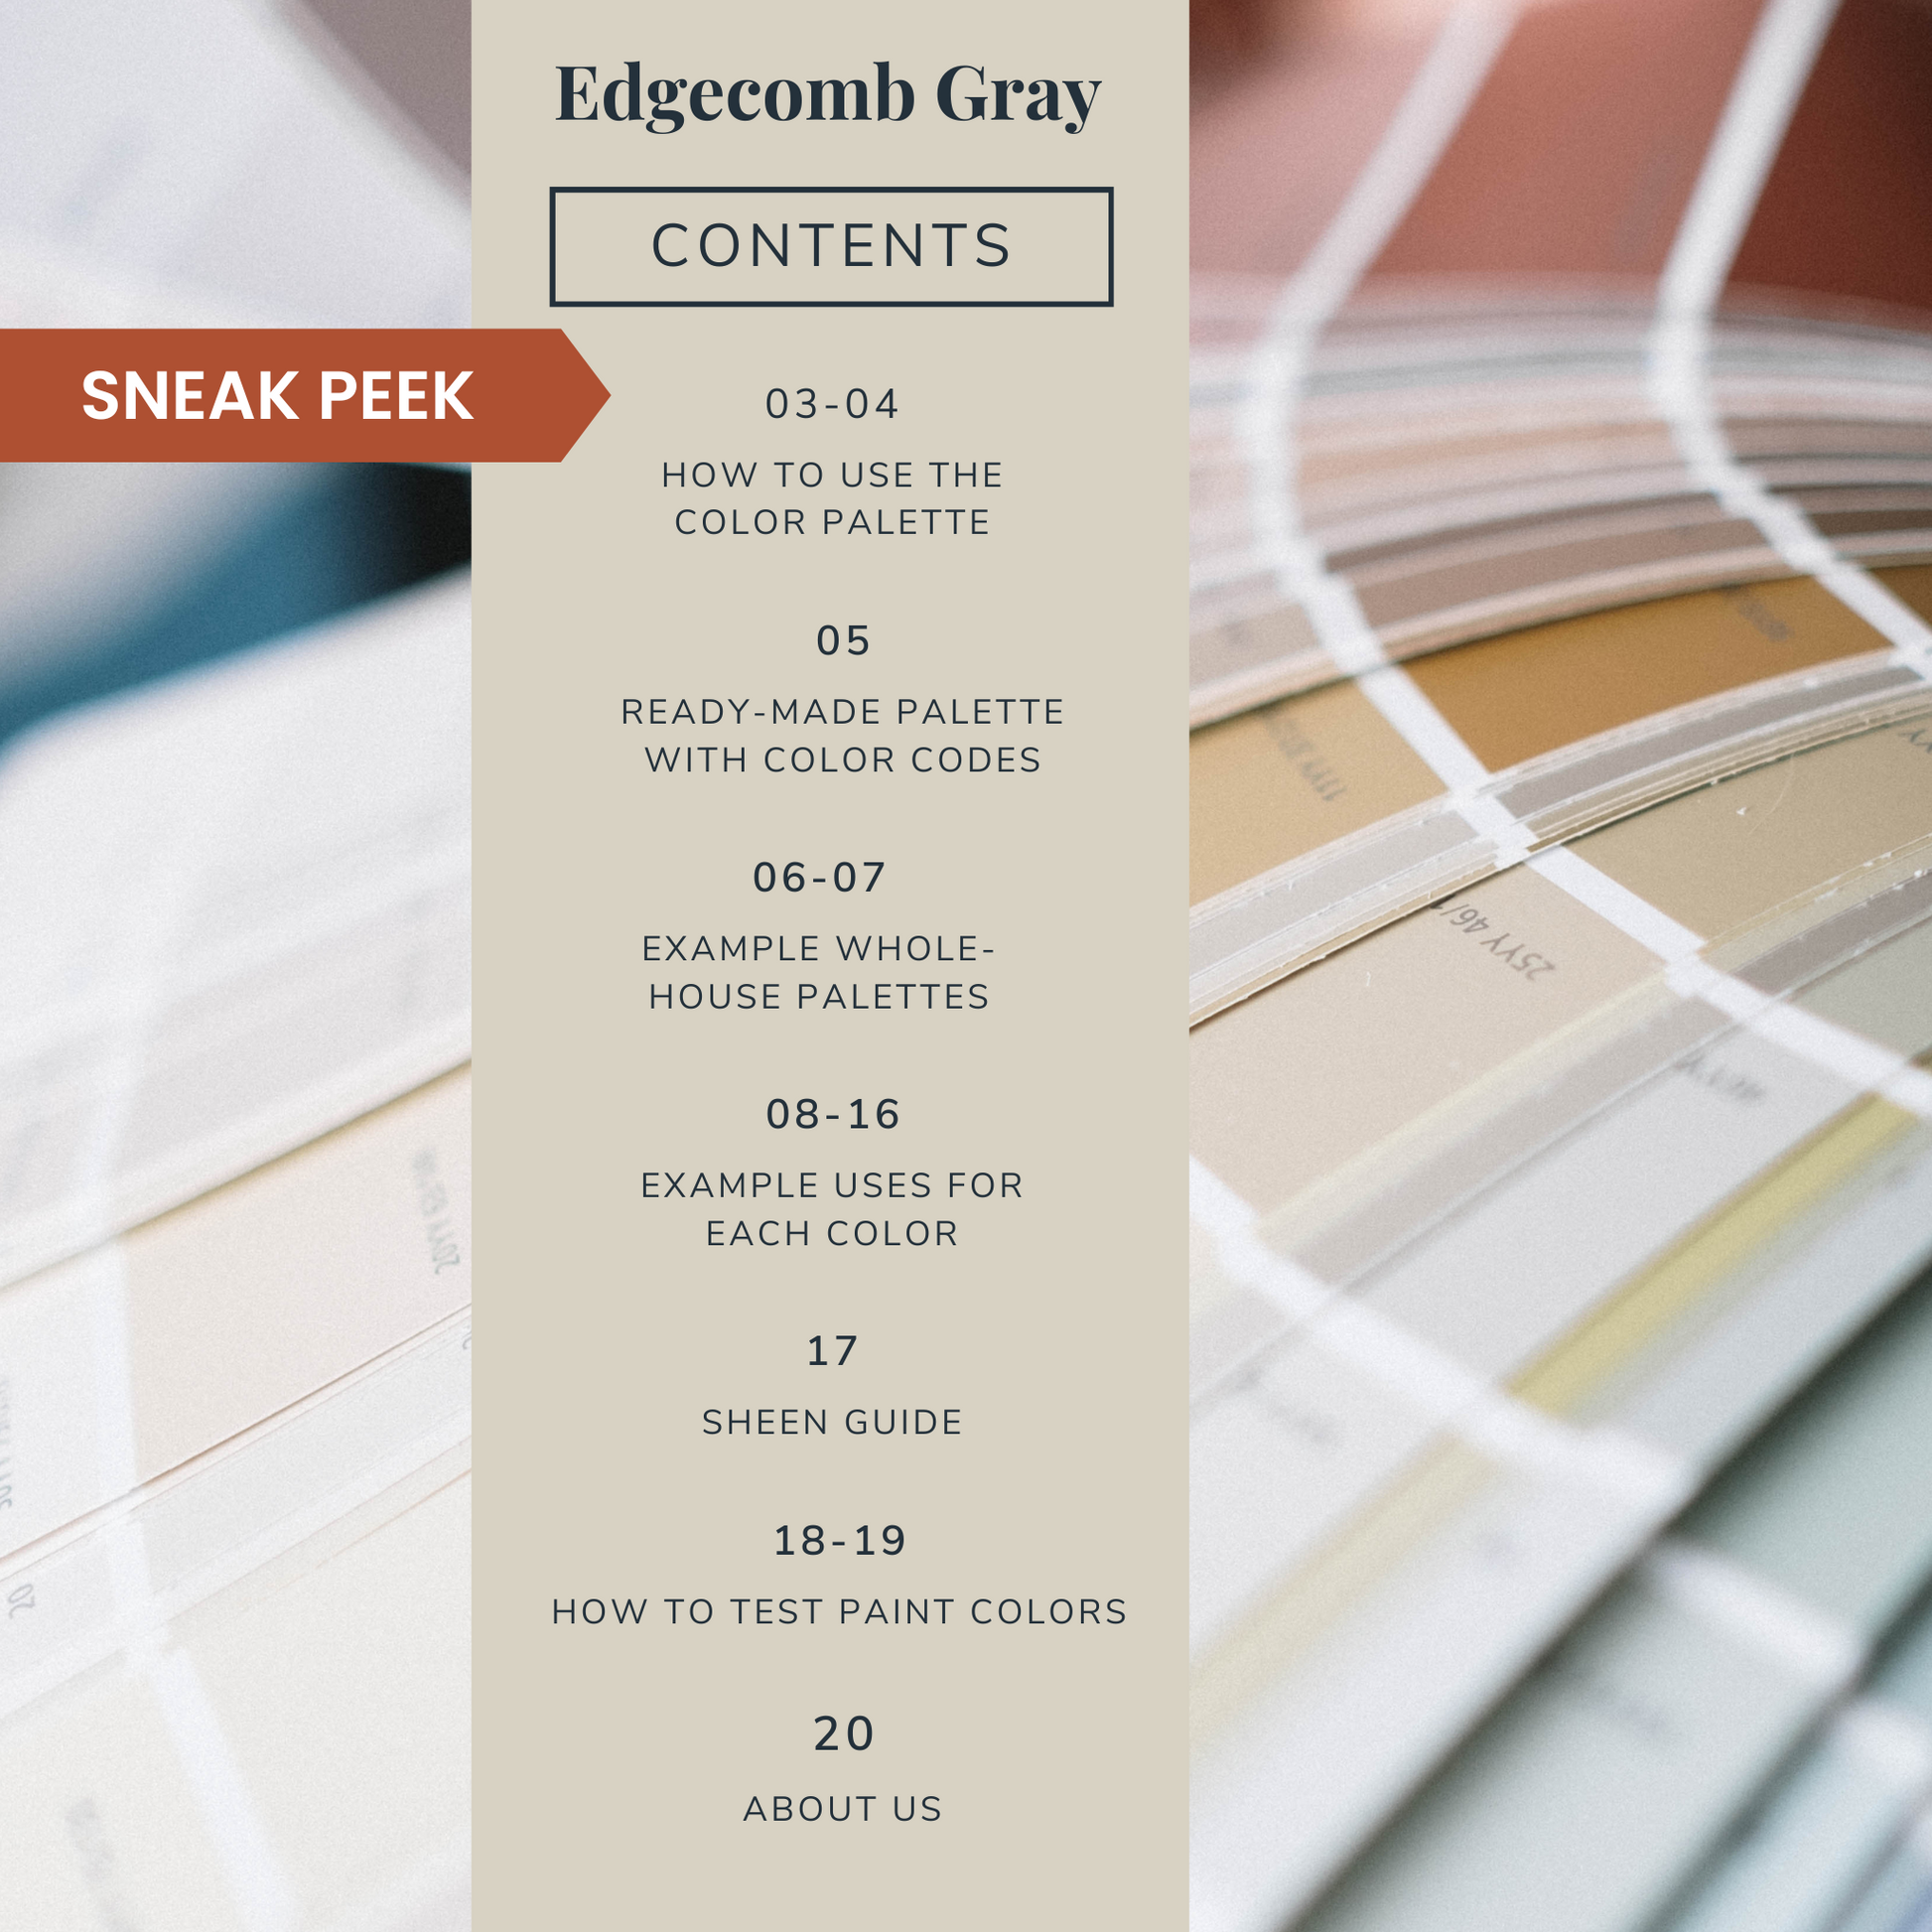 Contents list for a Benjamin Moore Edgecomb Gray color palette guide